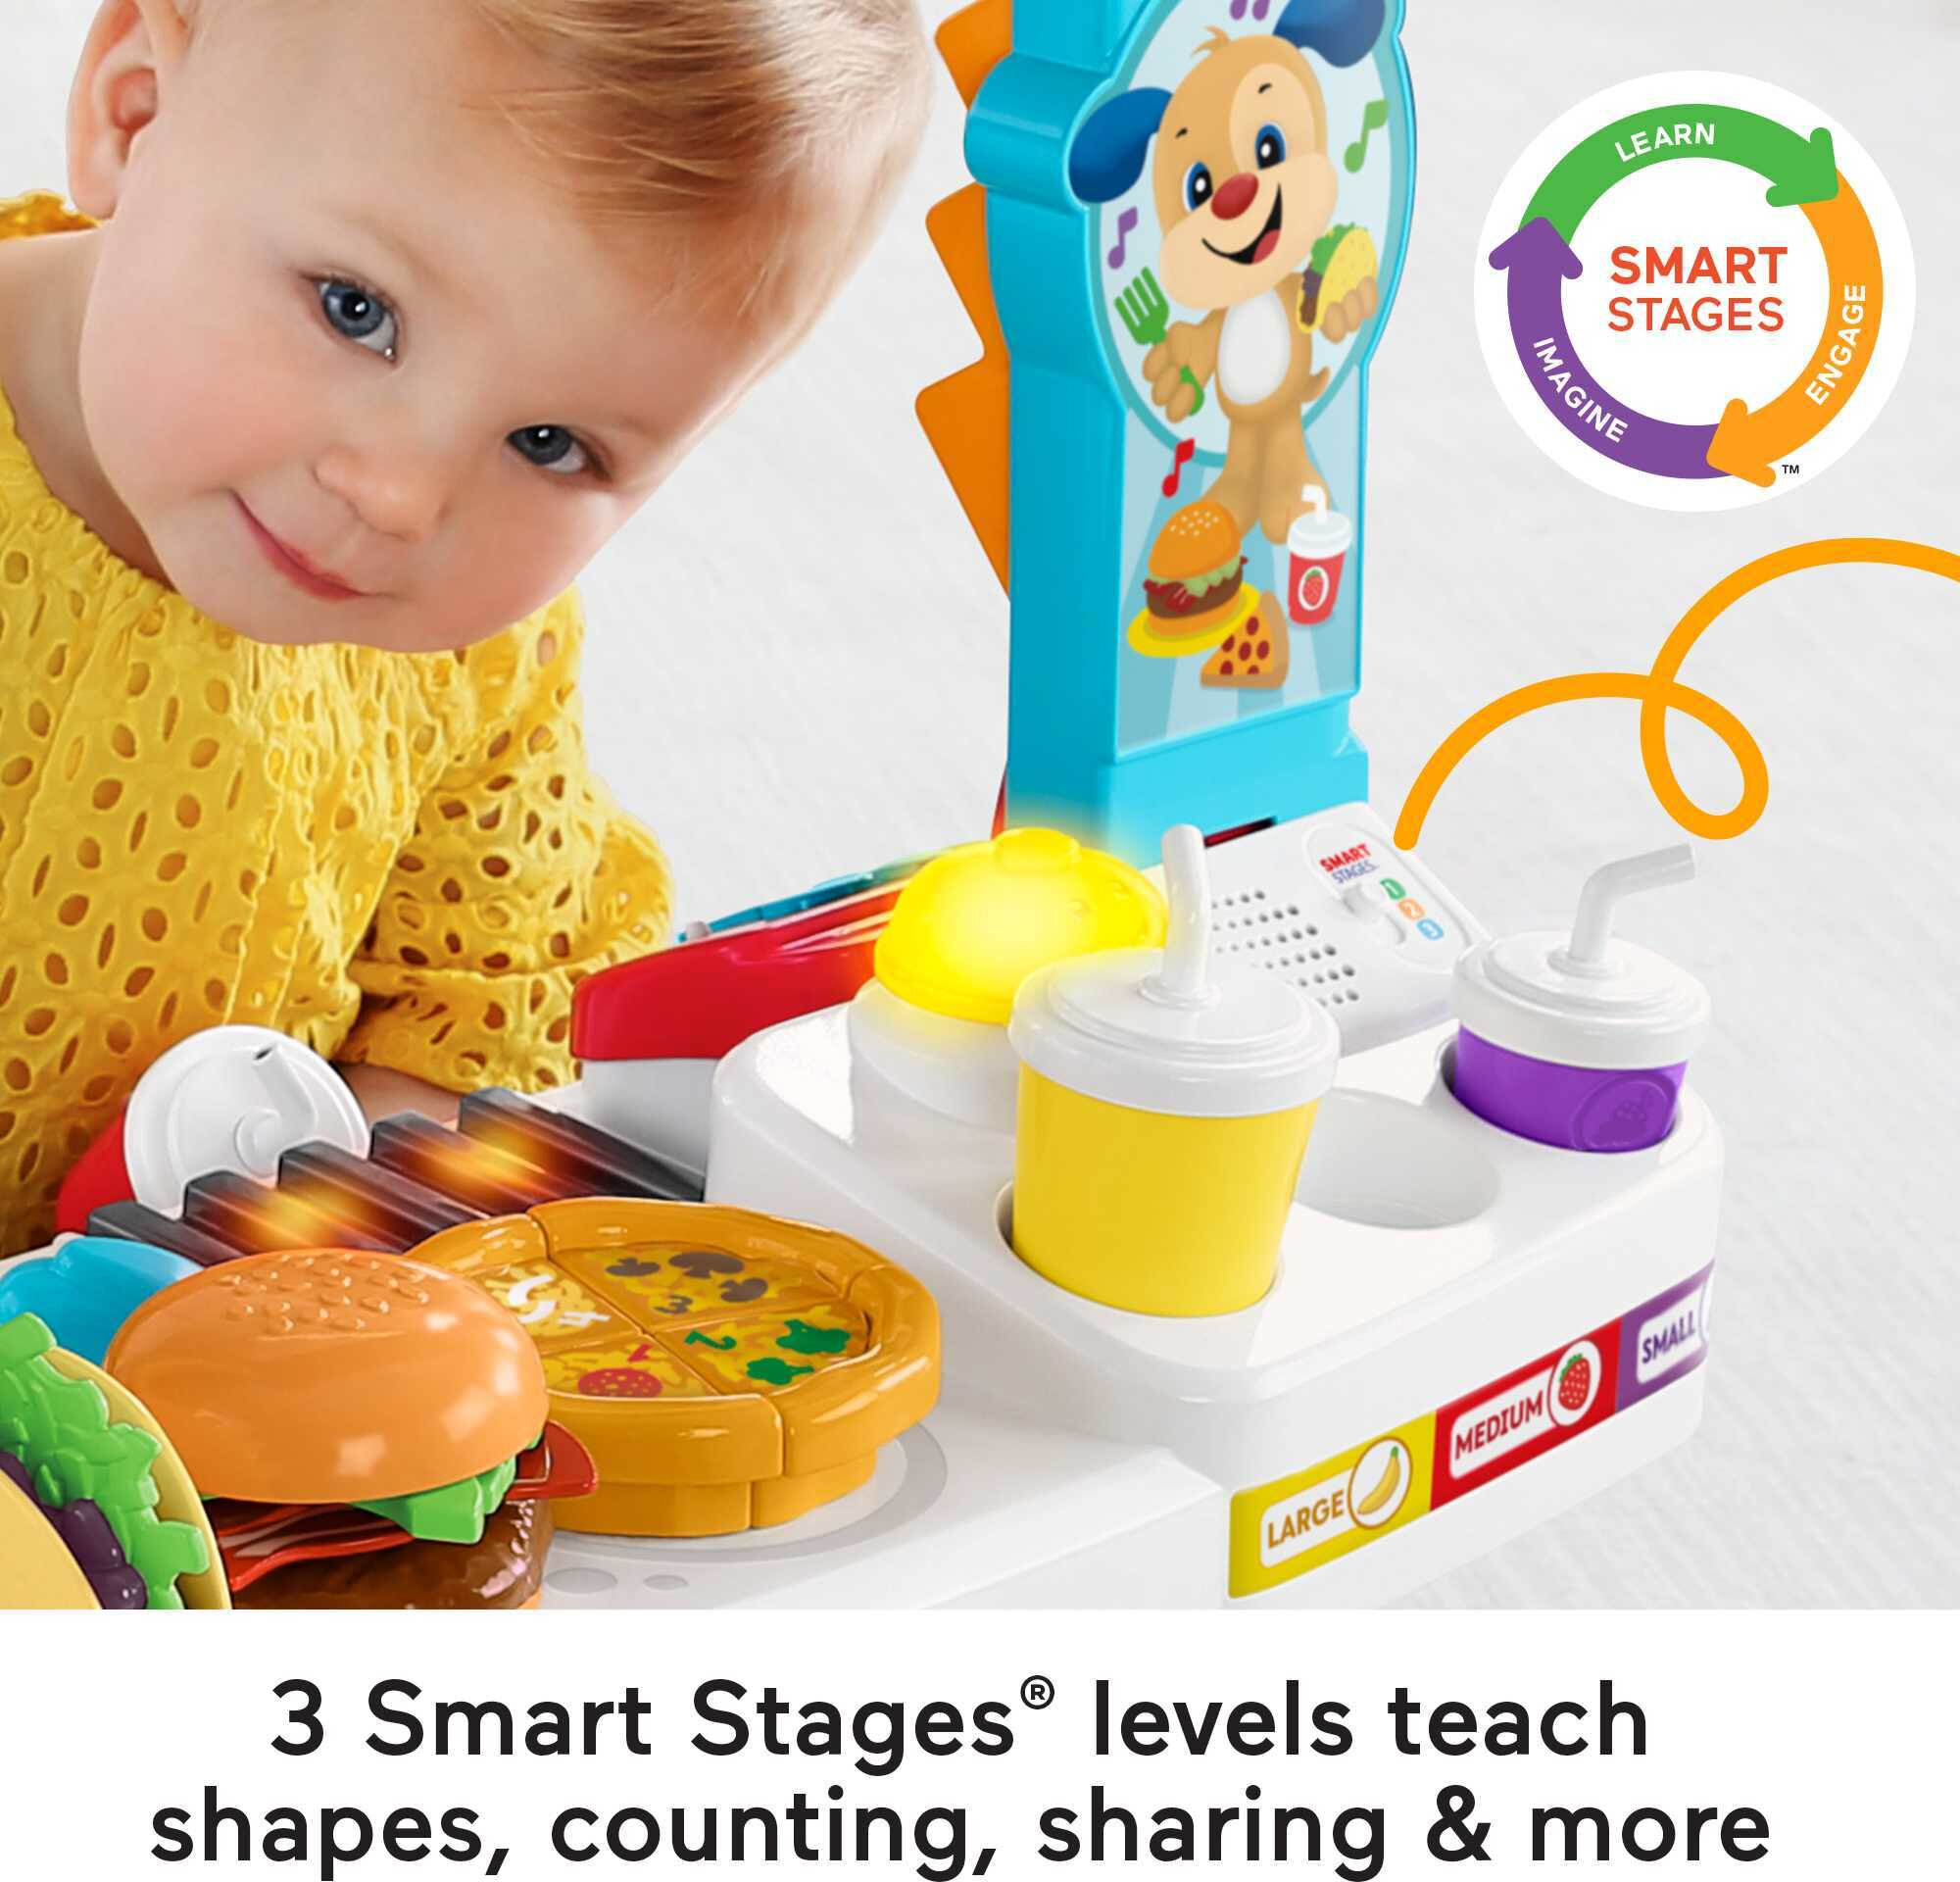 Fisher-Price Laugh & Learn Servin’ Up Fun Food Truck Electronic Activity Center for Toddlers - image 4 of 8